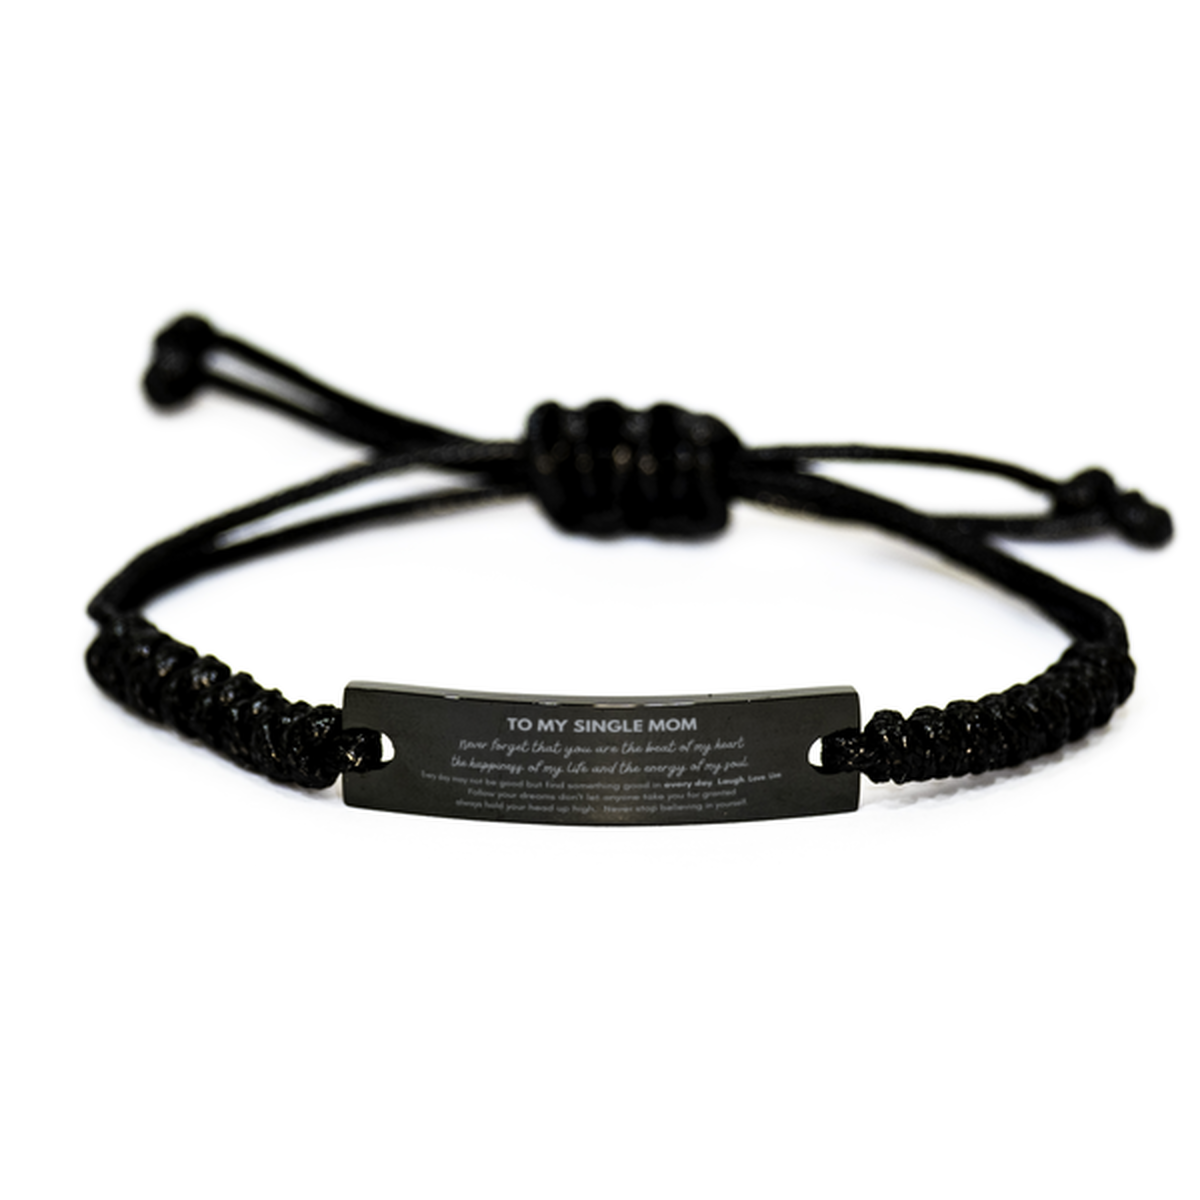 To My Single Mom Bracelet Gifts, Christmas Single Mom Black Rope Bracelet Present, Birthday Unique Motivational For Single Mom, To My Single Mom Never forget that you are the beat of my heart the happiness of my life and the energy of my soul